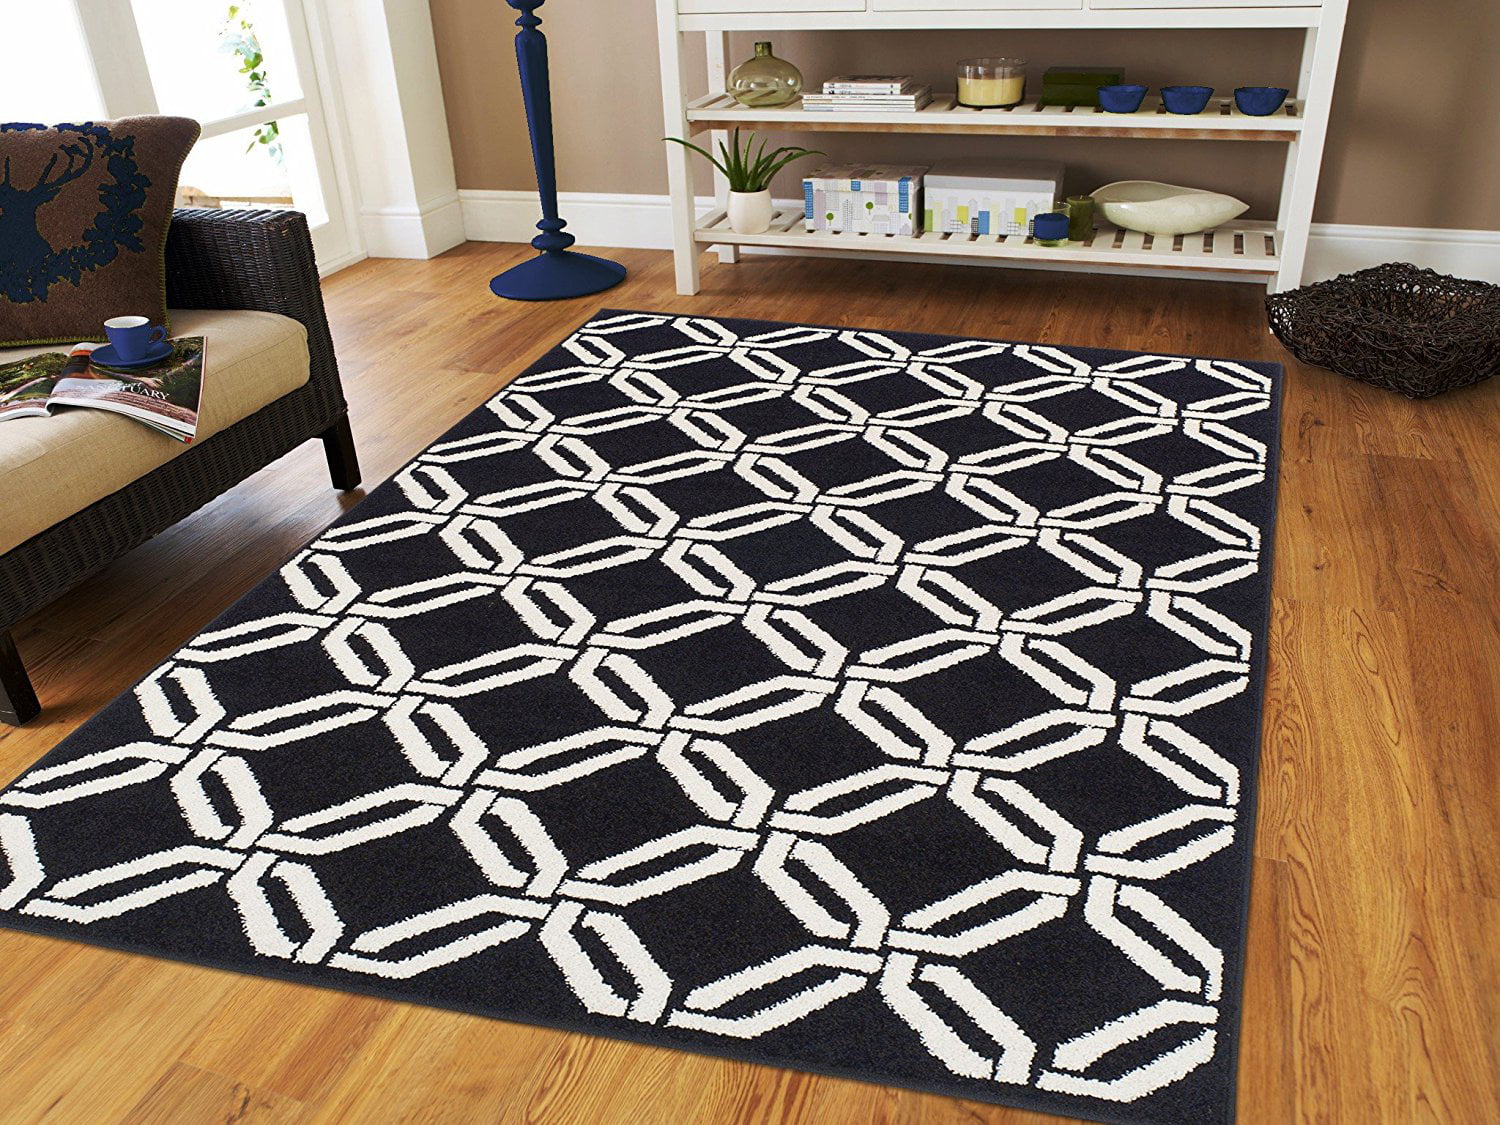 5x7 rug for dining room